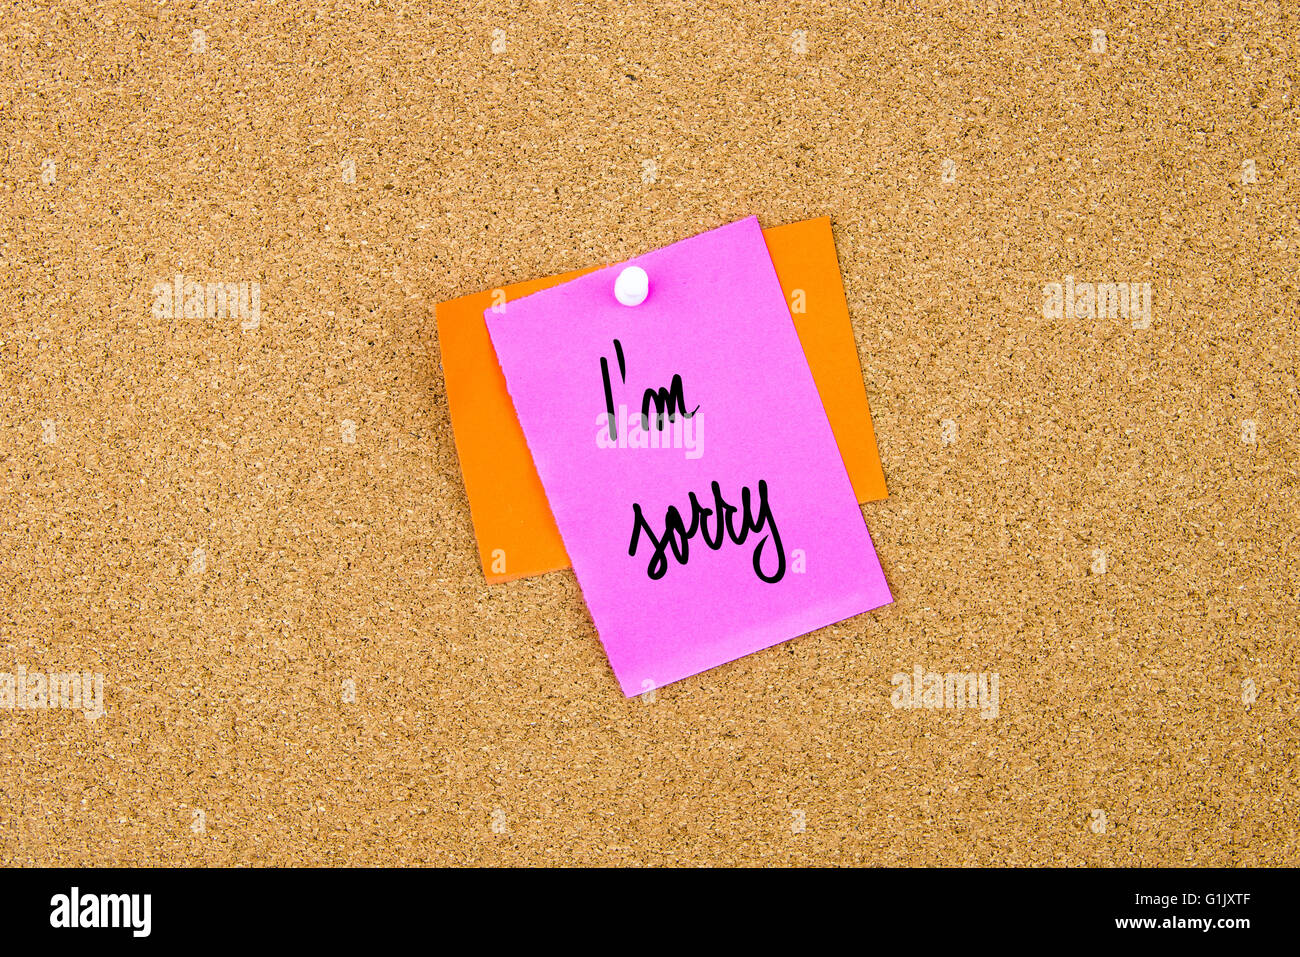 I Am Sorry written on paper note pinned on cork board with white thumbtack, copy space available Stock Photo